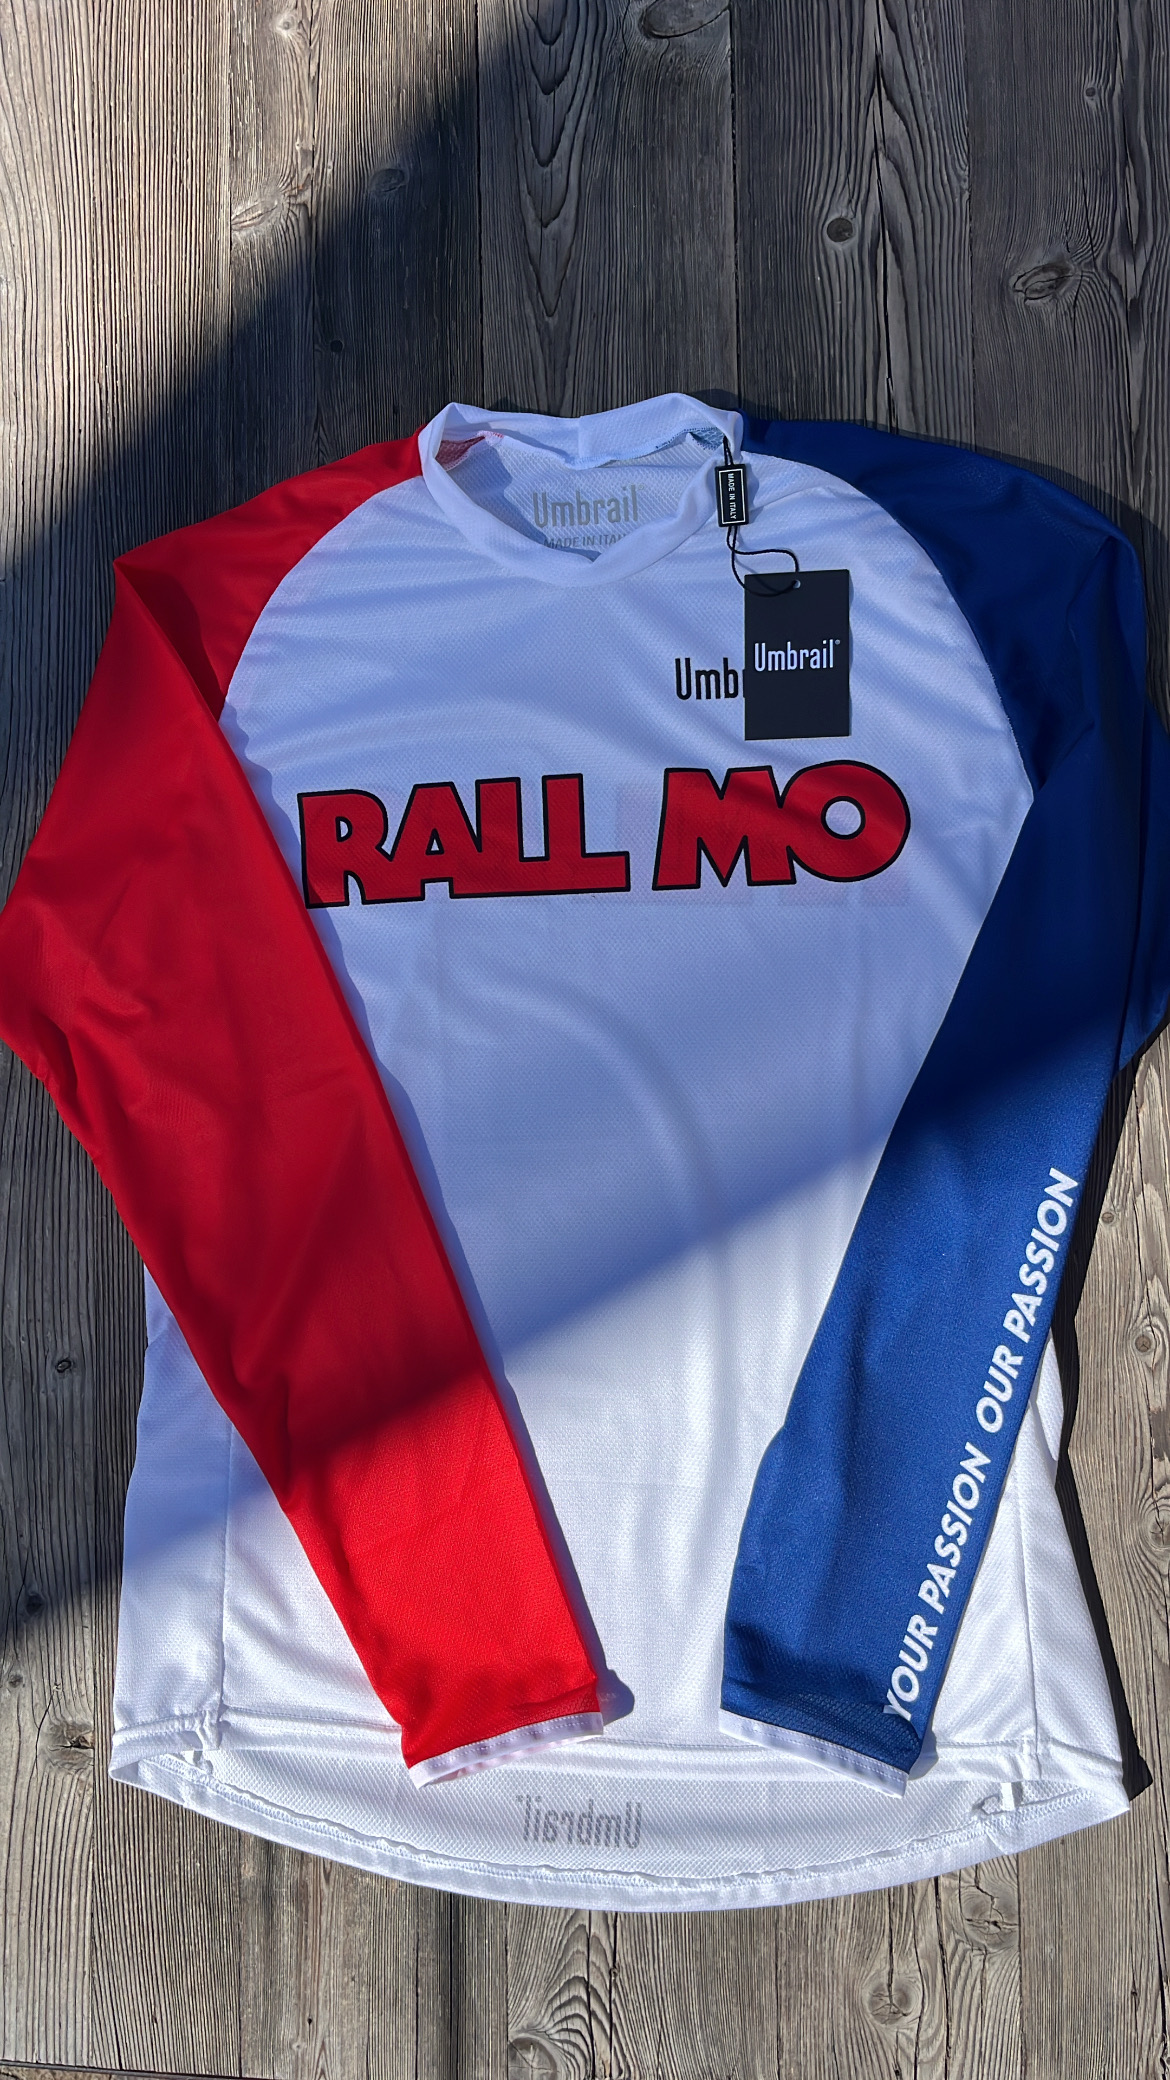 LONG SLEEVE JERSEY FREE RIDE RALL MO WHITE